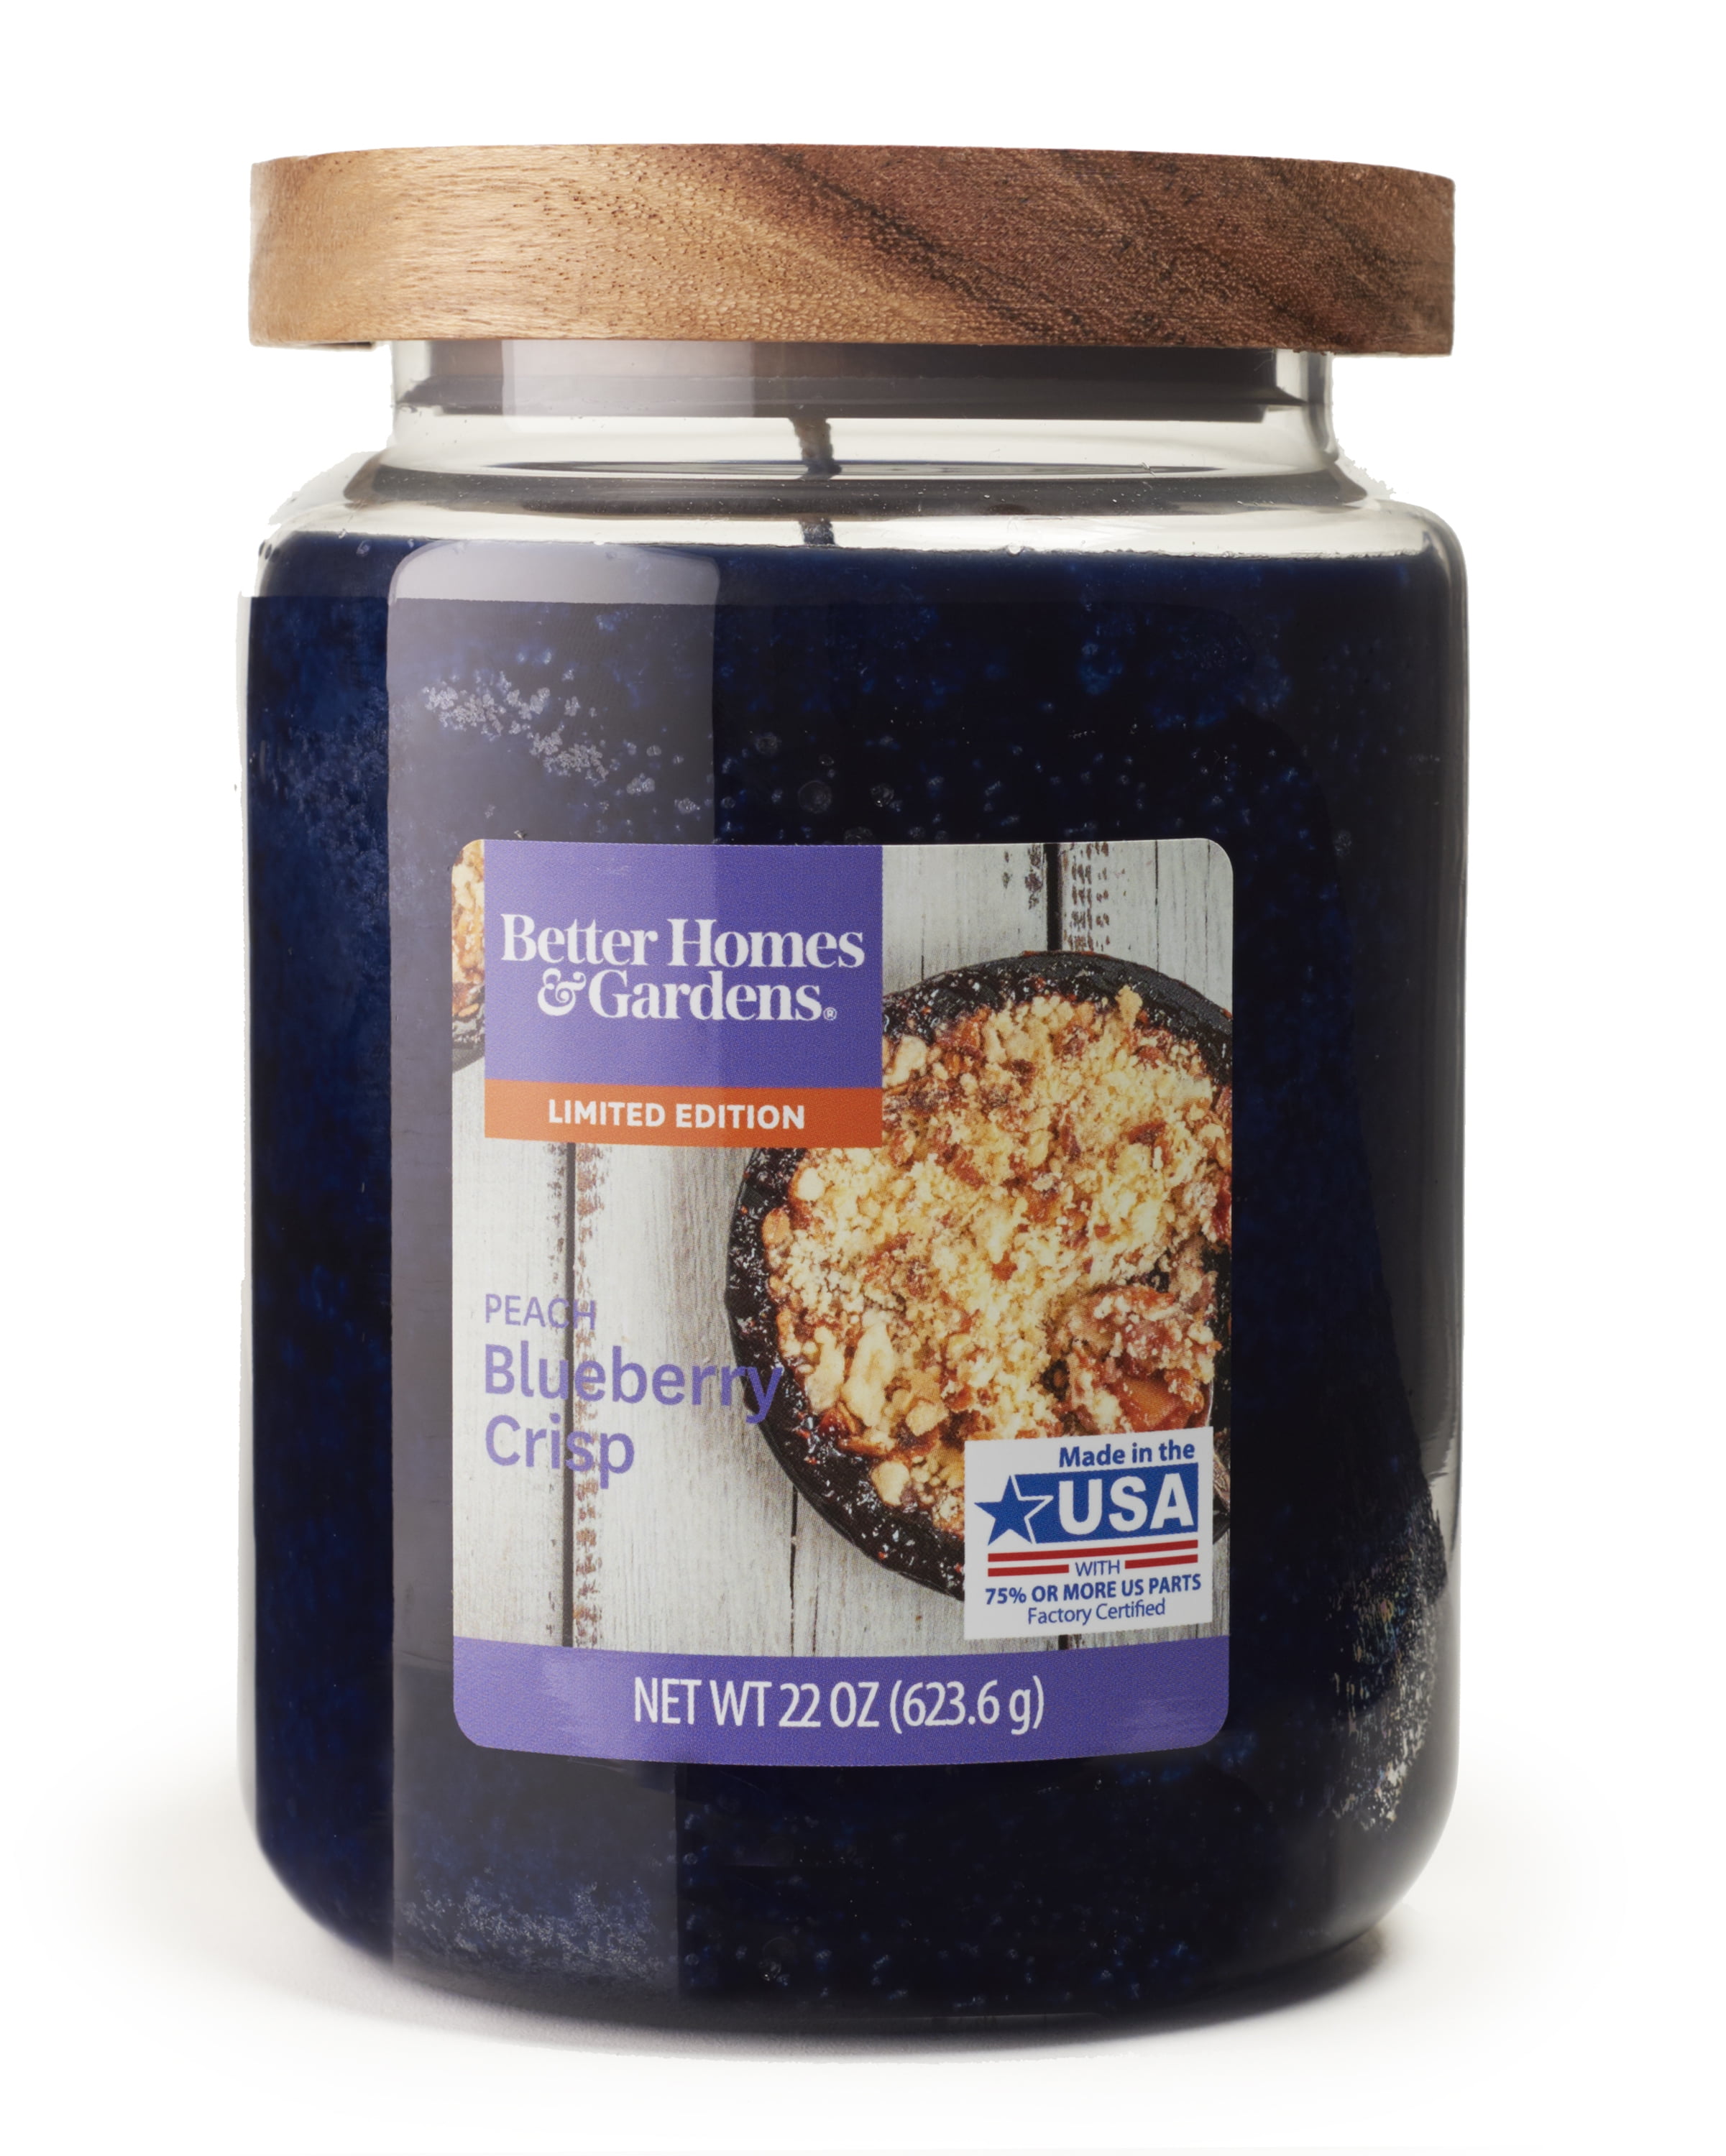 Blueberry - Medium Jar Candle - Hearth & Home Candle Company